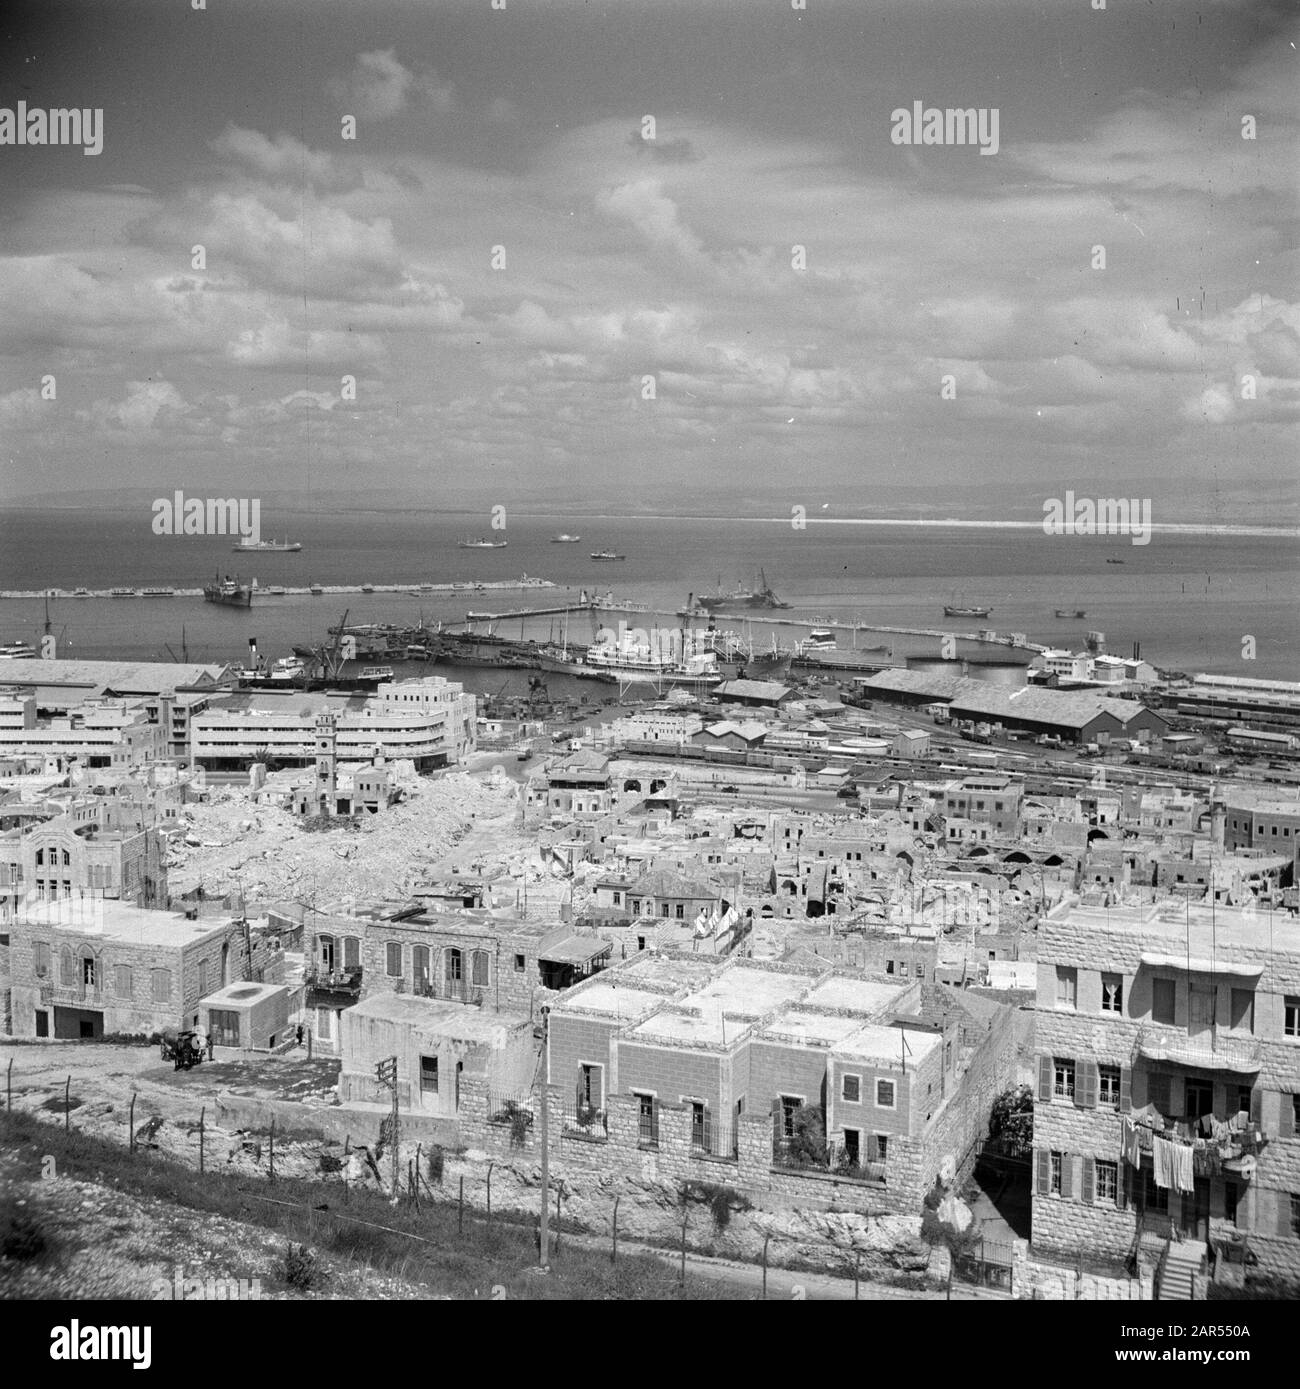 Israel 1948-1949: Haifa  Haifa. City and port: in the middle are visible the devastations resulting from the Battle of Independence Date: 1948 Location: Haifa, Israel Keywords: ports, independence struggle, war damage, panoramas, ruins, ships Stock Photo